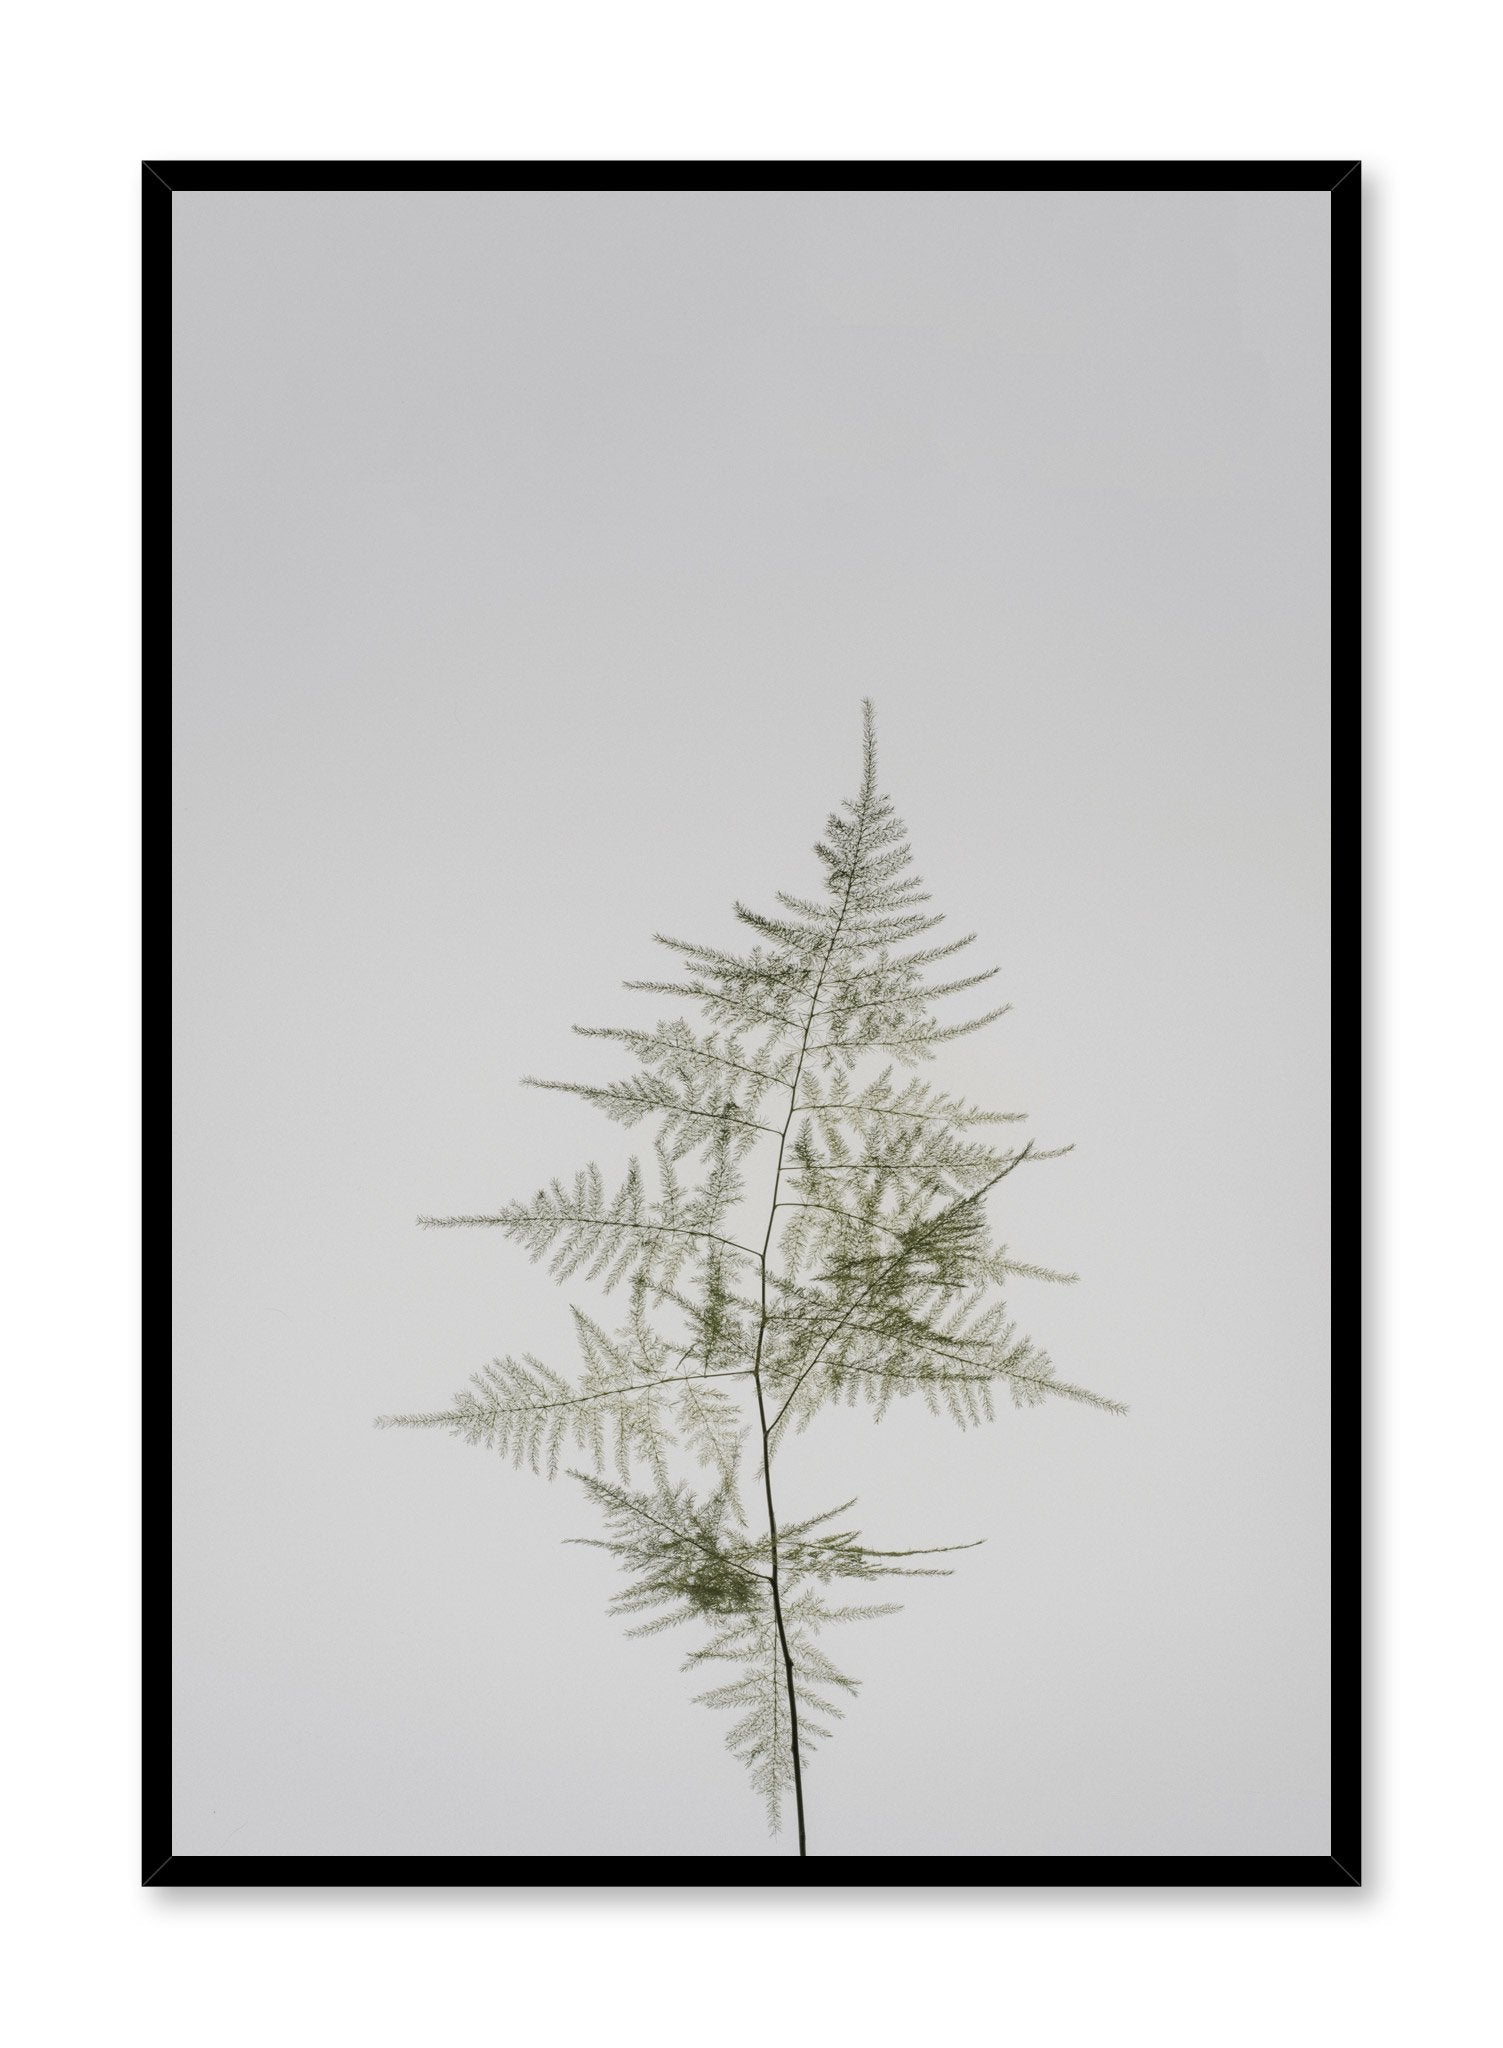 Minimalist design poster by Opposite Wall with Young Fern photography